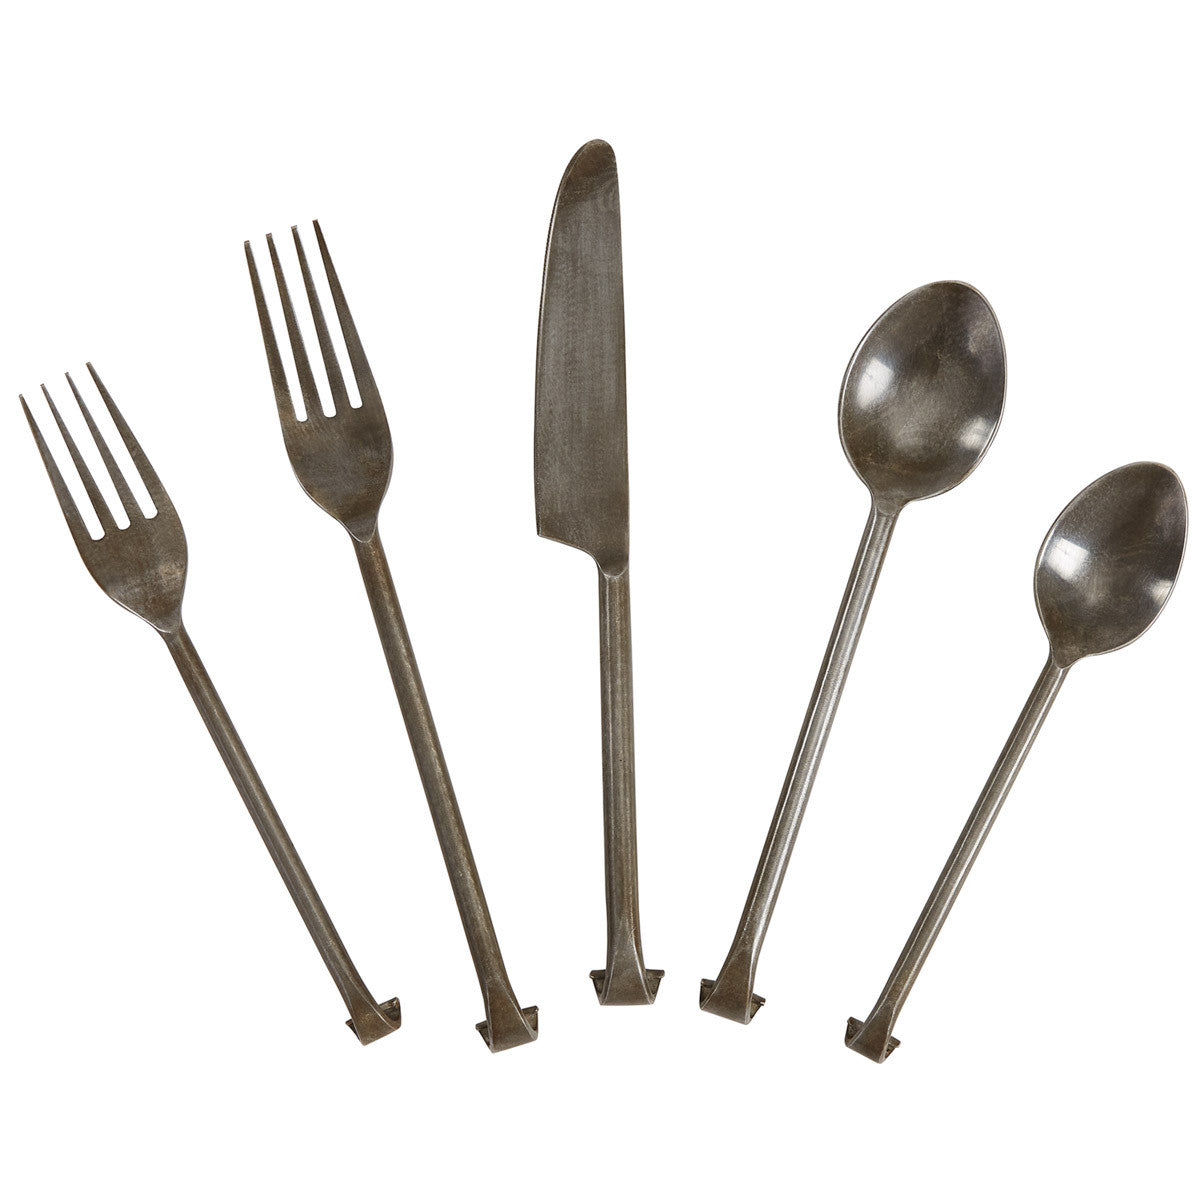 Forged Scroll Five Piece Place Setting - Park Designs